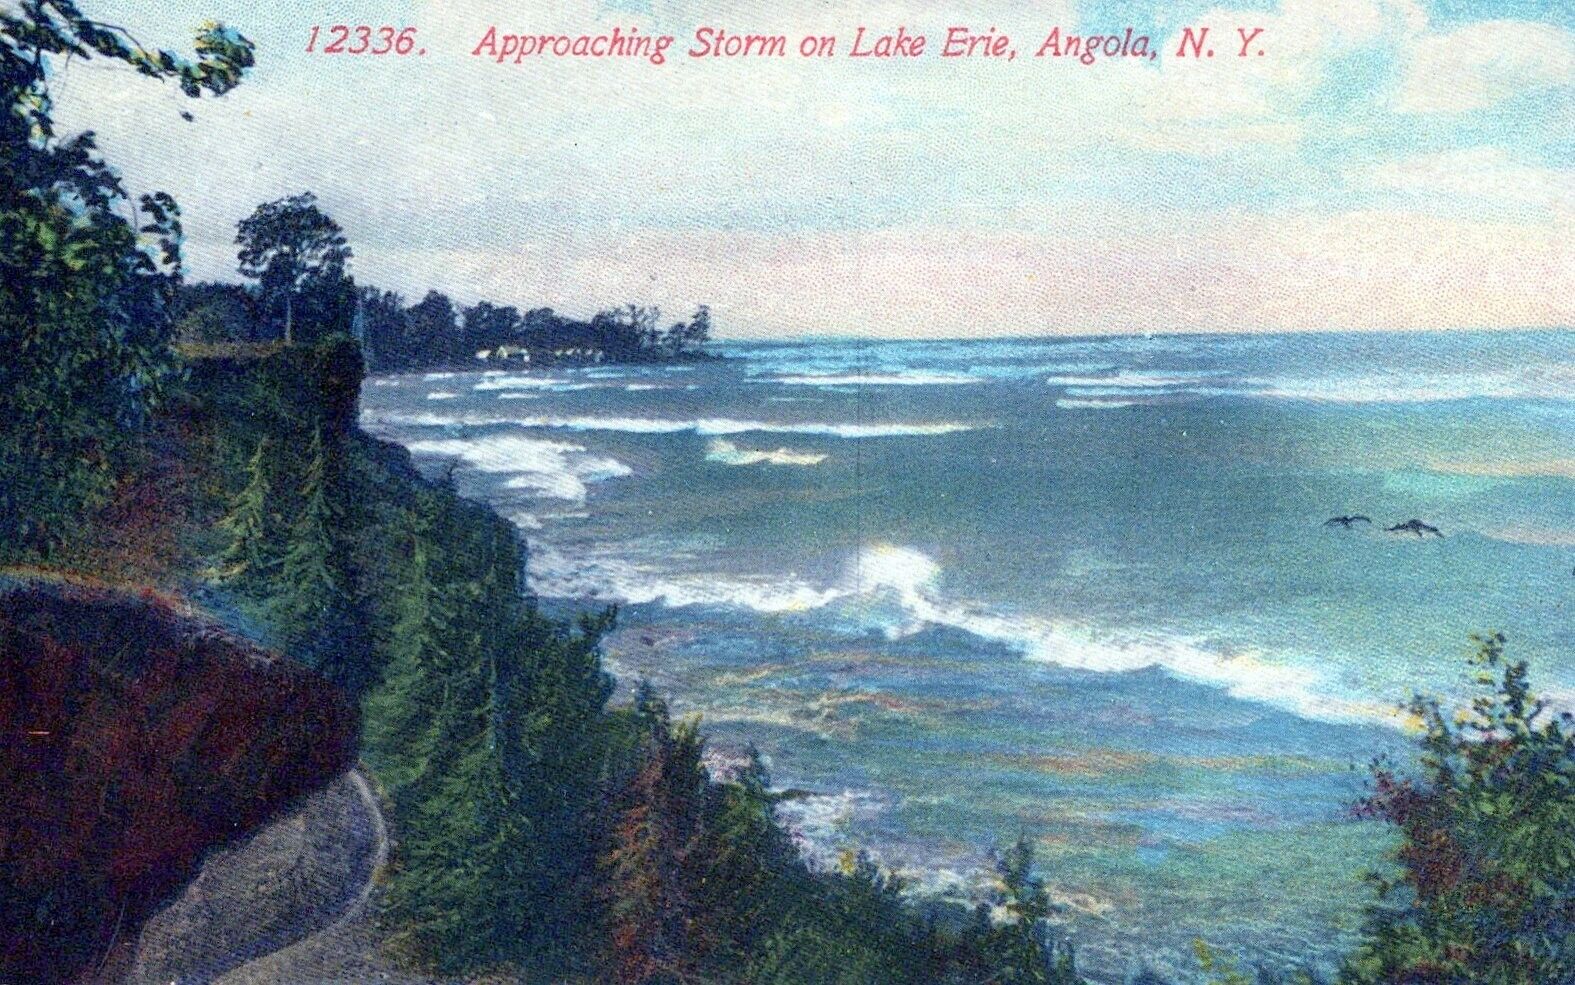 Angola New York Approaching Storm on Lake Erie Postcard